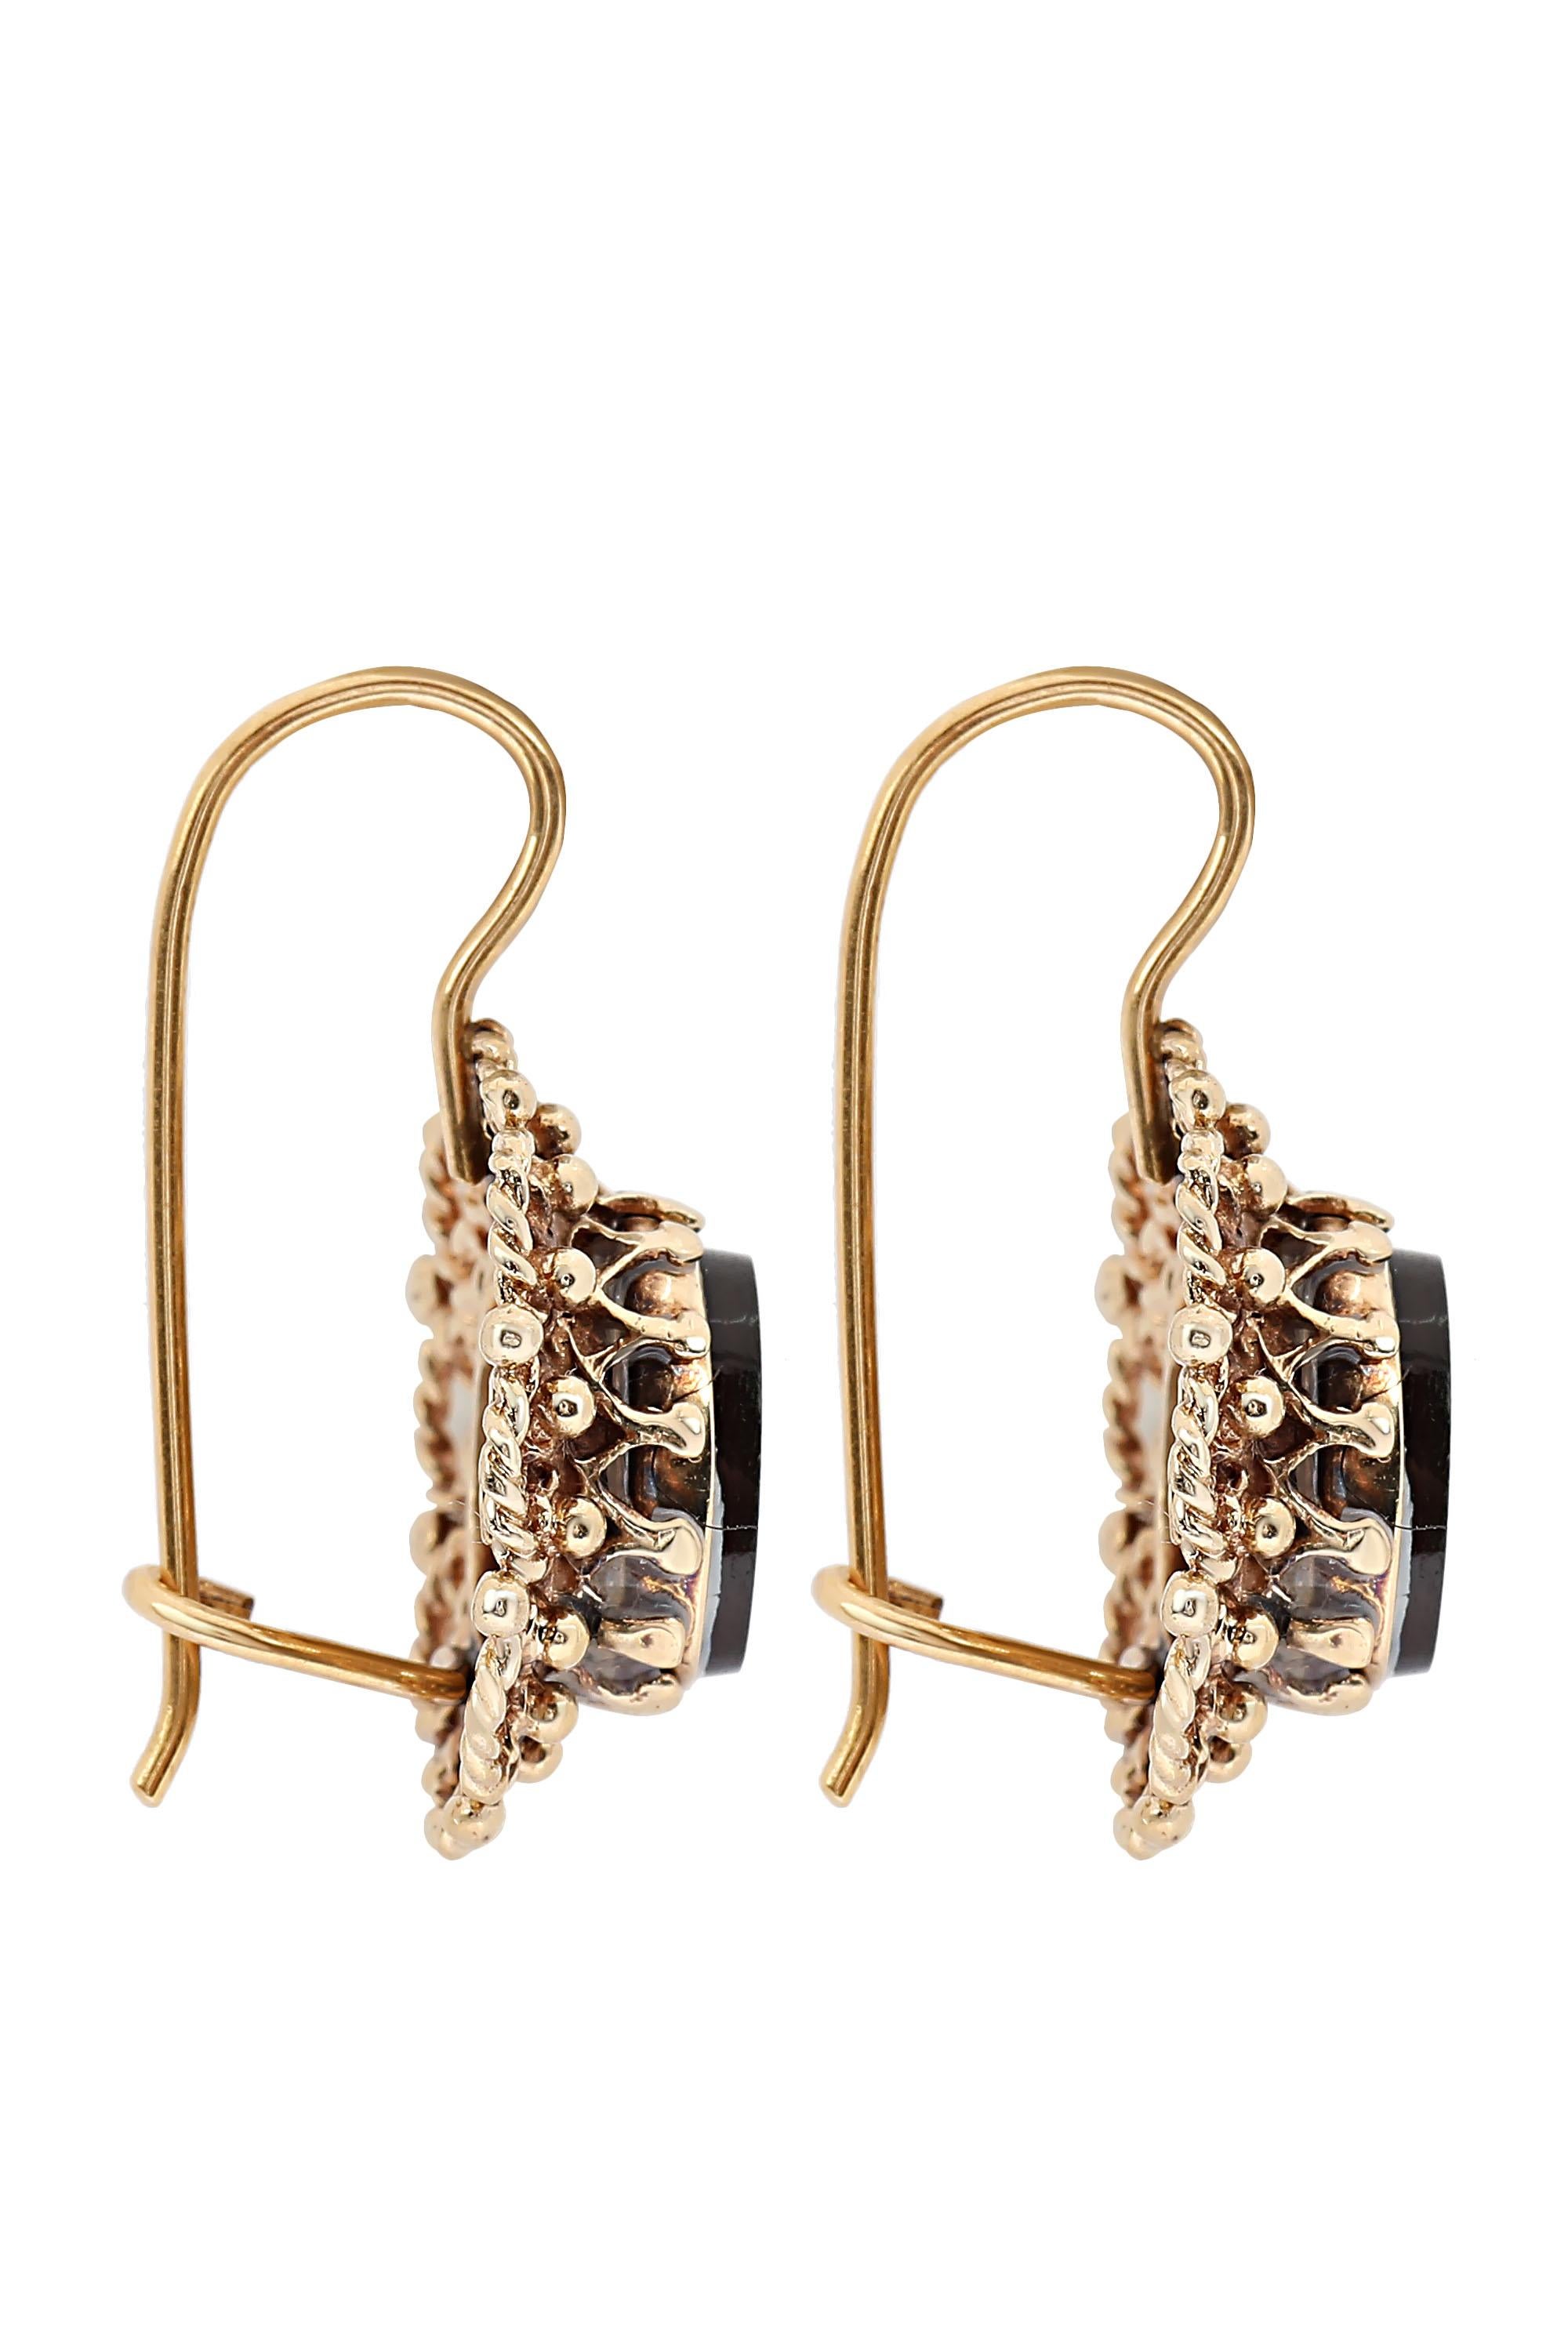 These attractive vintage drop earrings center onyx ovals in richly detailed 14 karat yellow gold frames completed by secure lever back findings. Earrings are 1” in total length and weigh 3.8 grams.